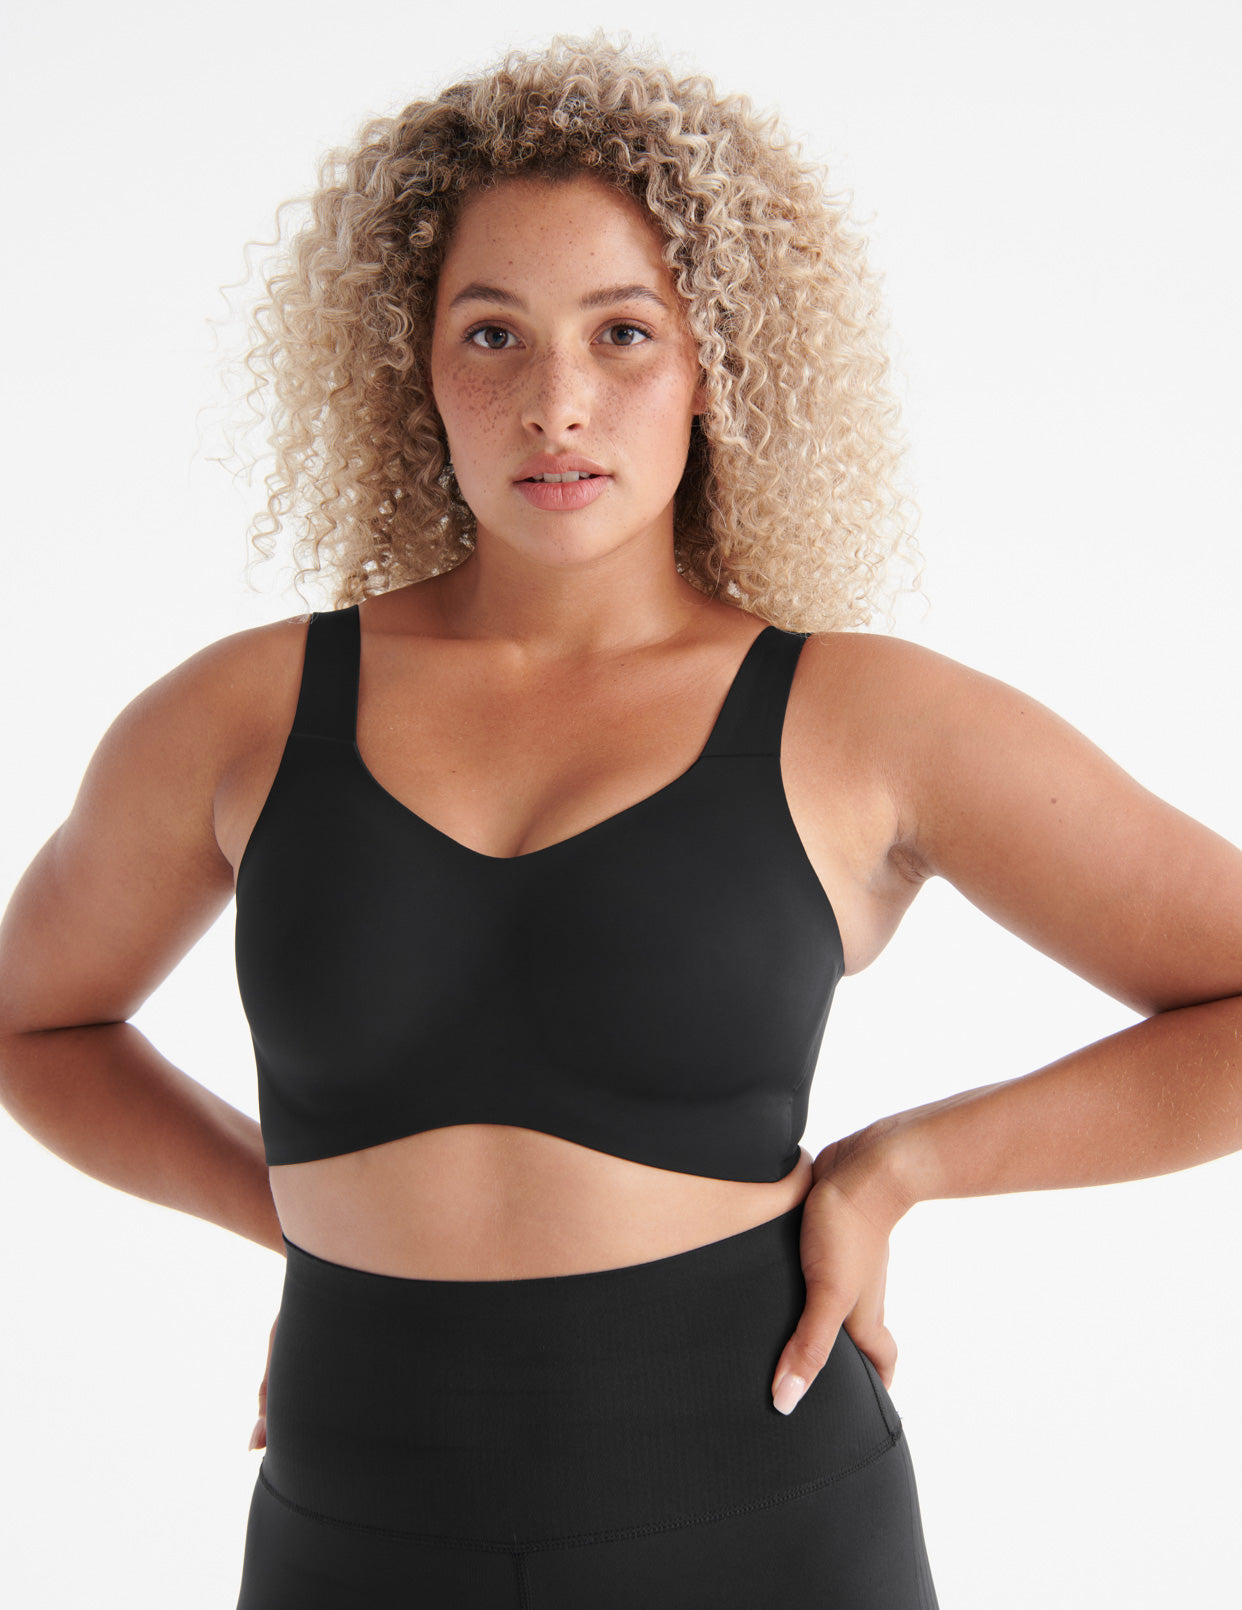 The Catalyst Best High Impact Sports Bra For Support And Comfort Knix 